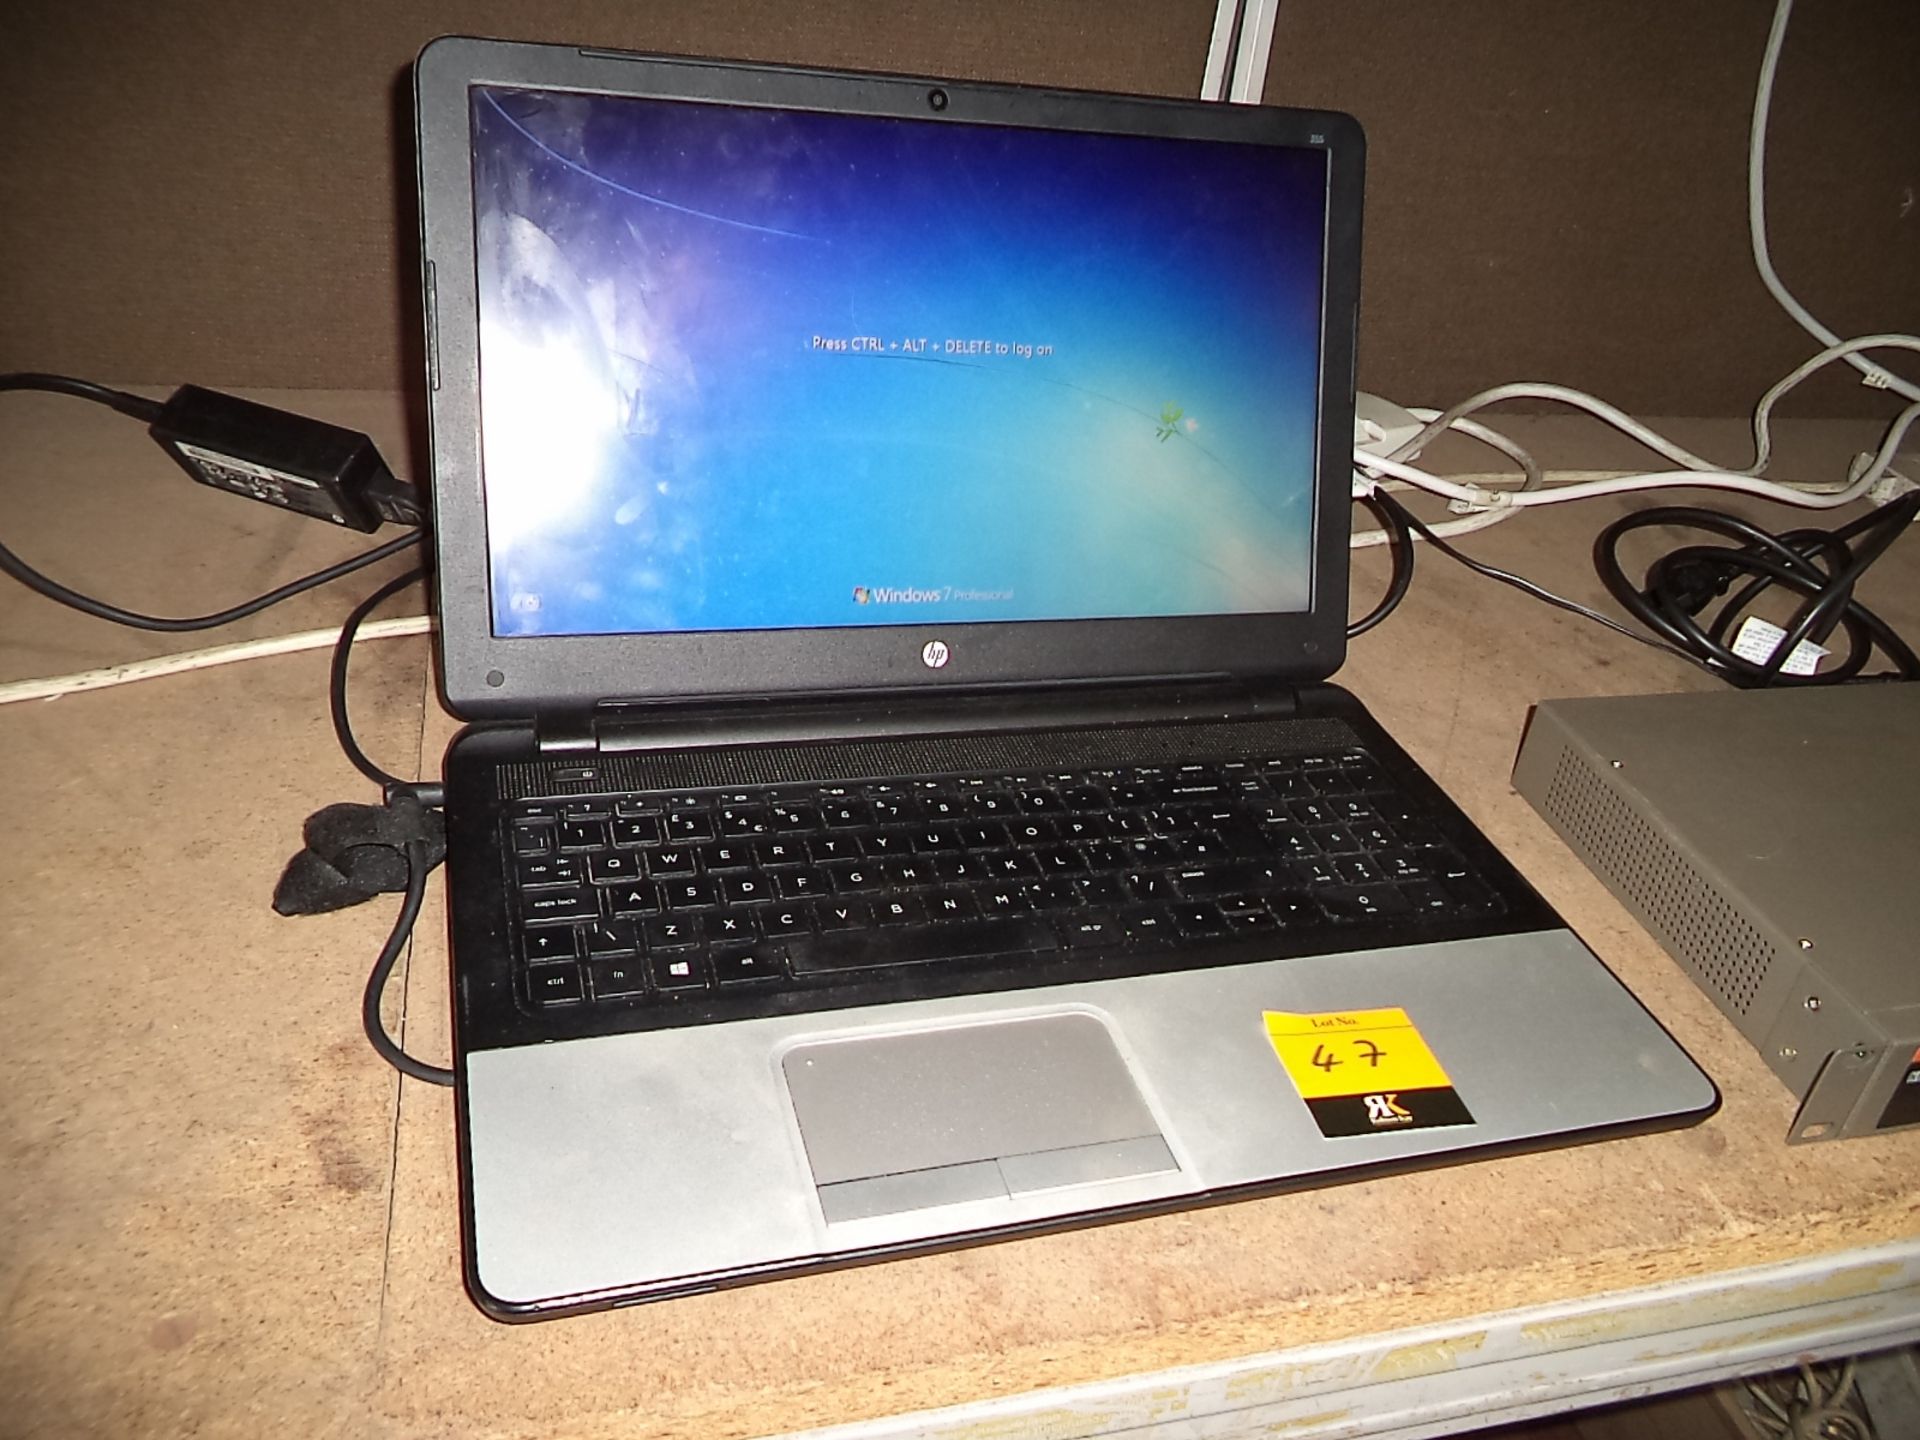 HP notebook computer model 355G2 with AMD A4-6210 APU, 4GB Ram, 500GB HDD, including power pack - Image 5 of 6